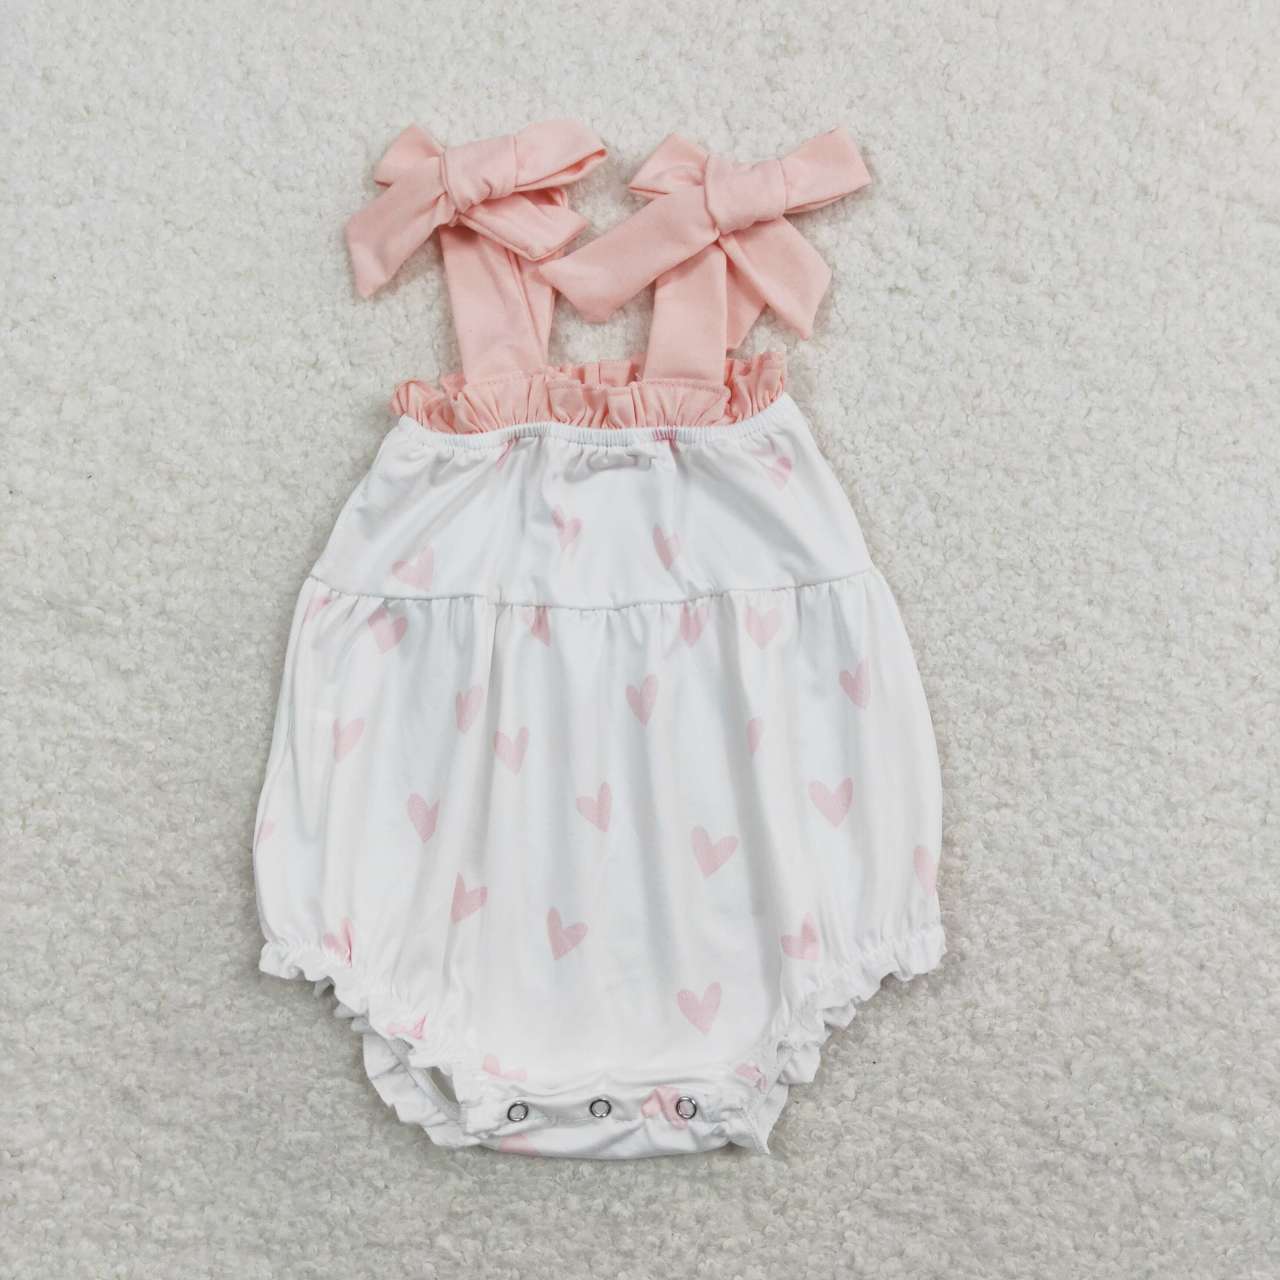 SR0731 Love pink and white bow suspender jumpsuit